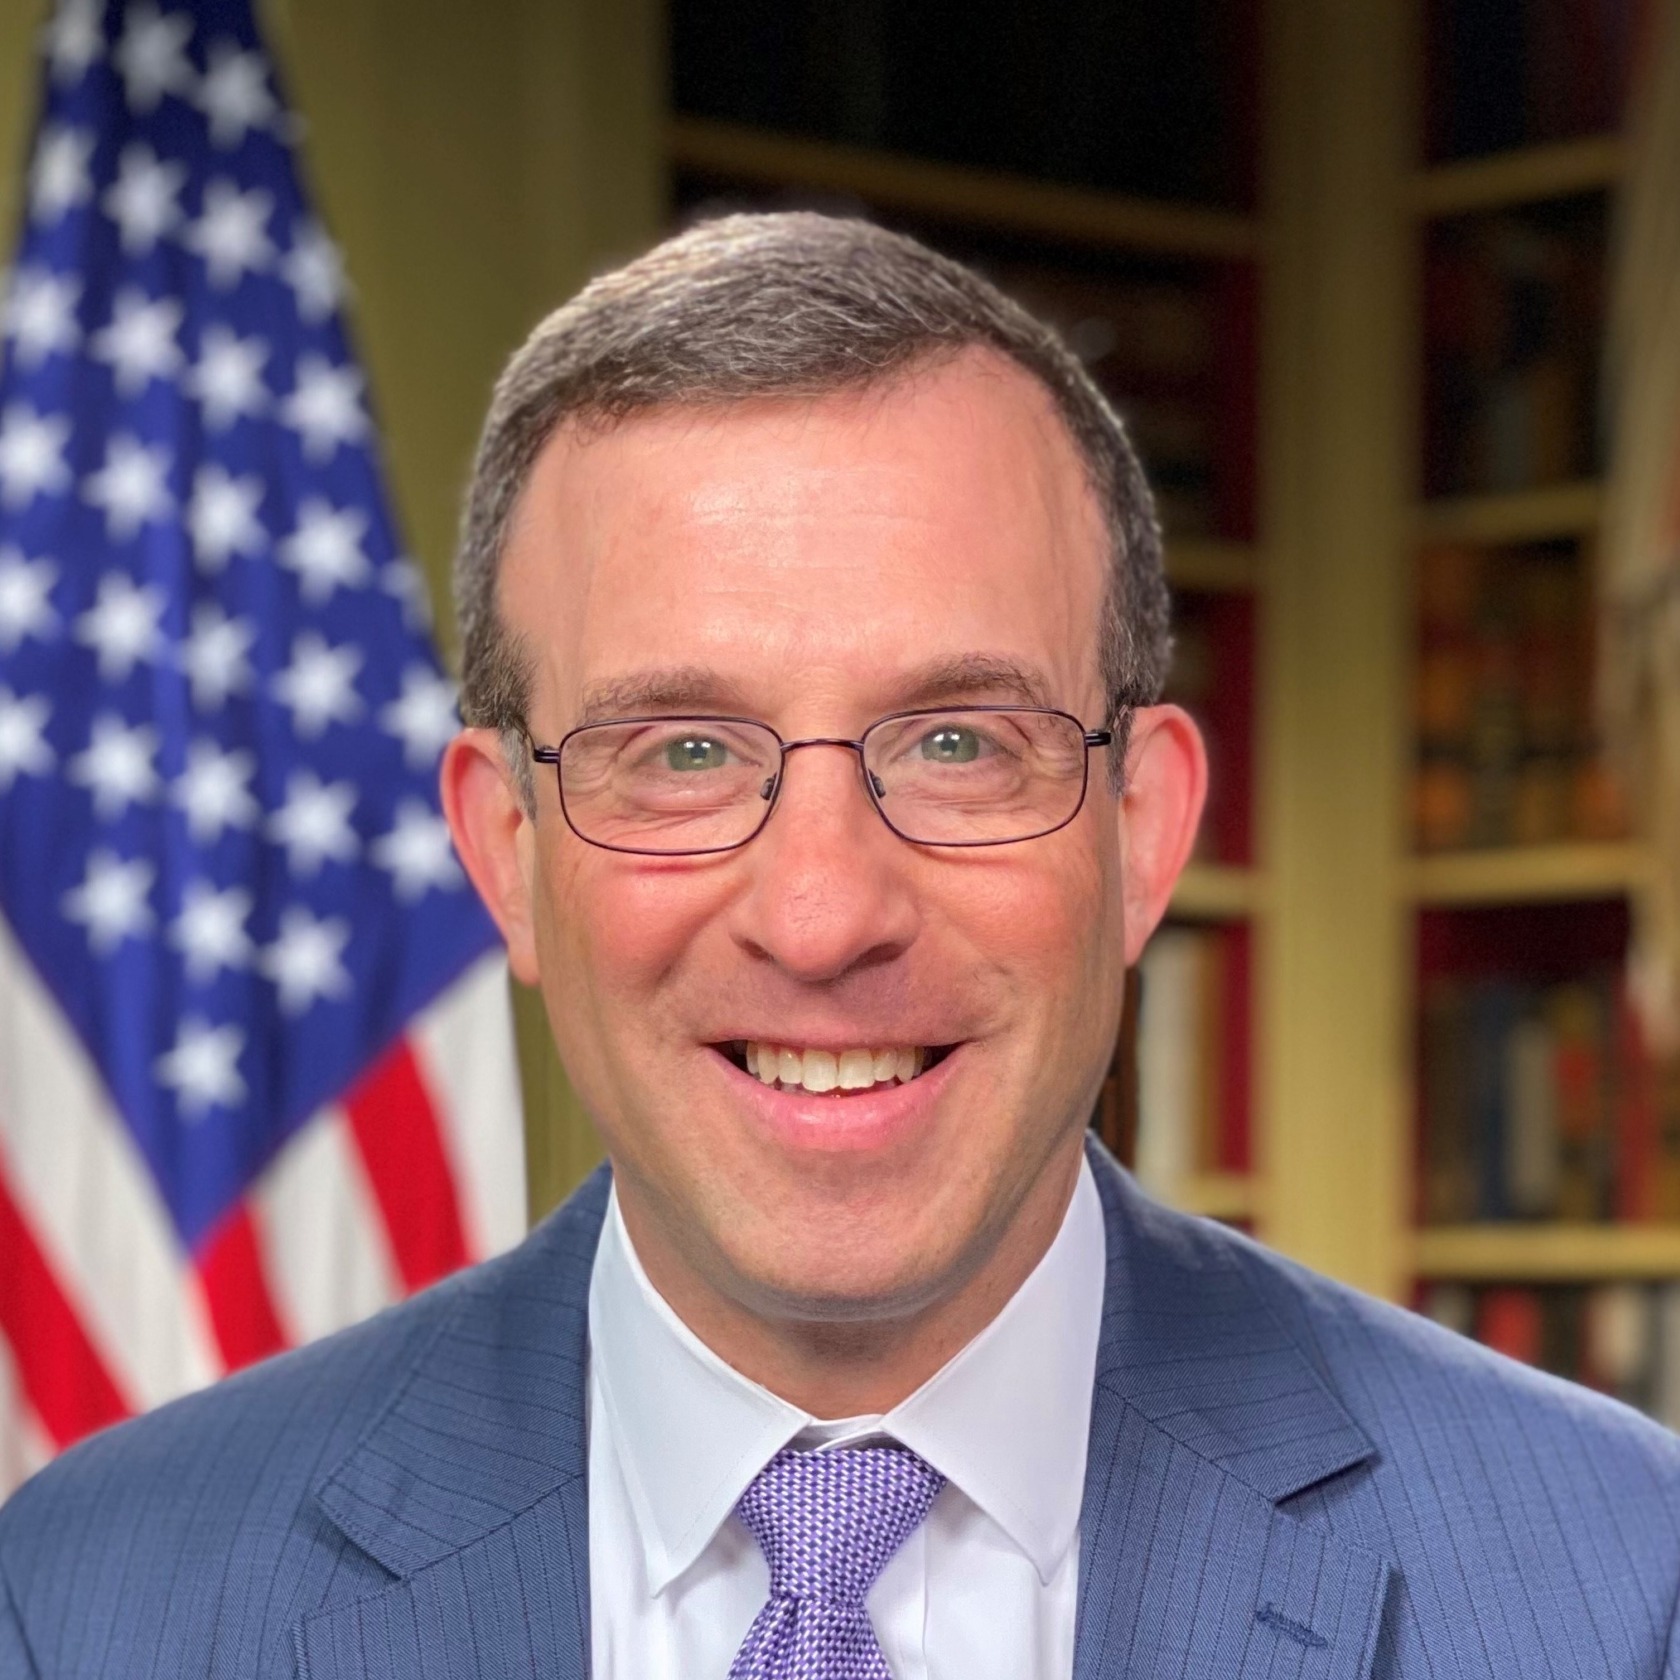 Jeff Greene's headshot. A person with short hair, wearing glasses, a jacket, and a tie, is in front of a bookshelf and American flag, smiling at the camera.